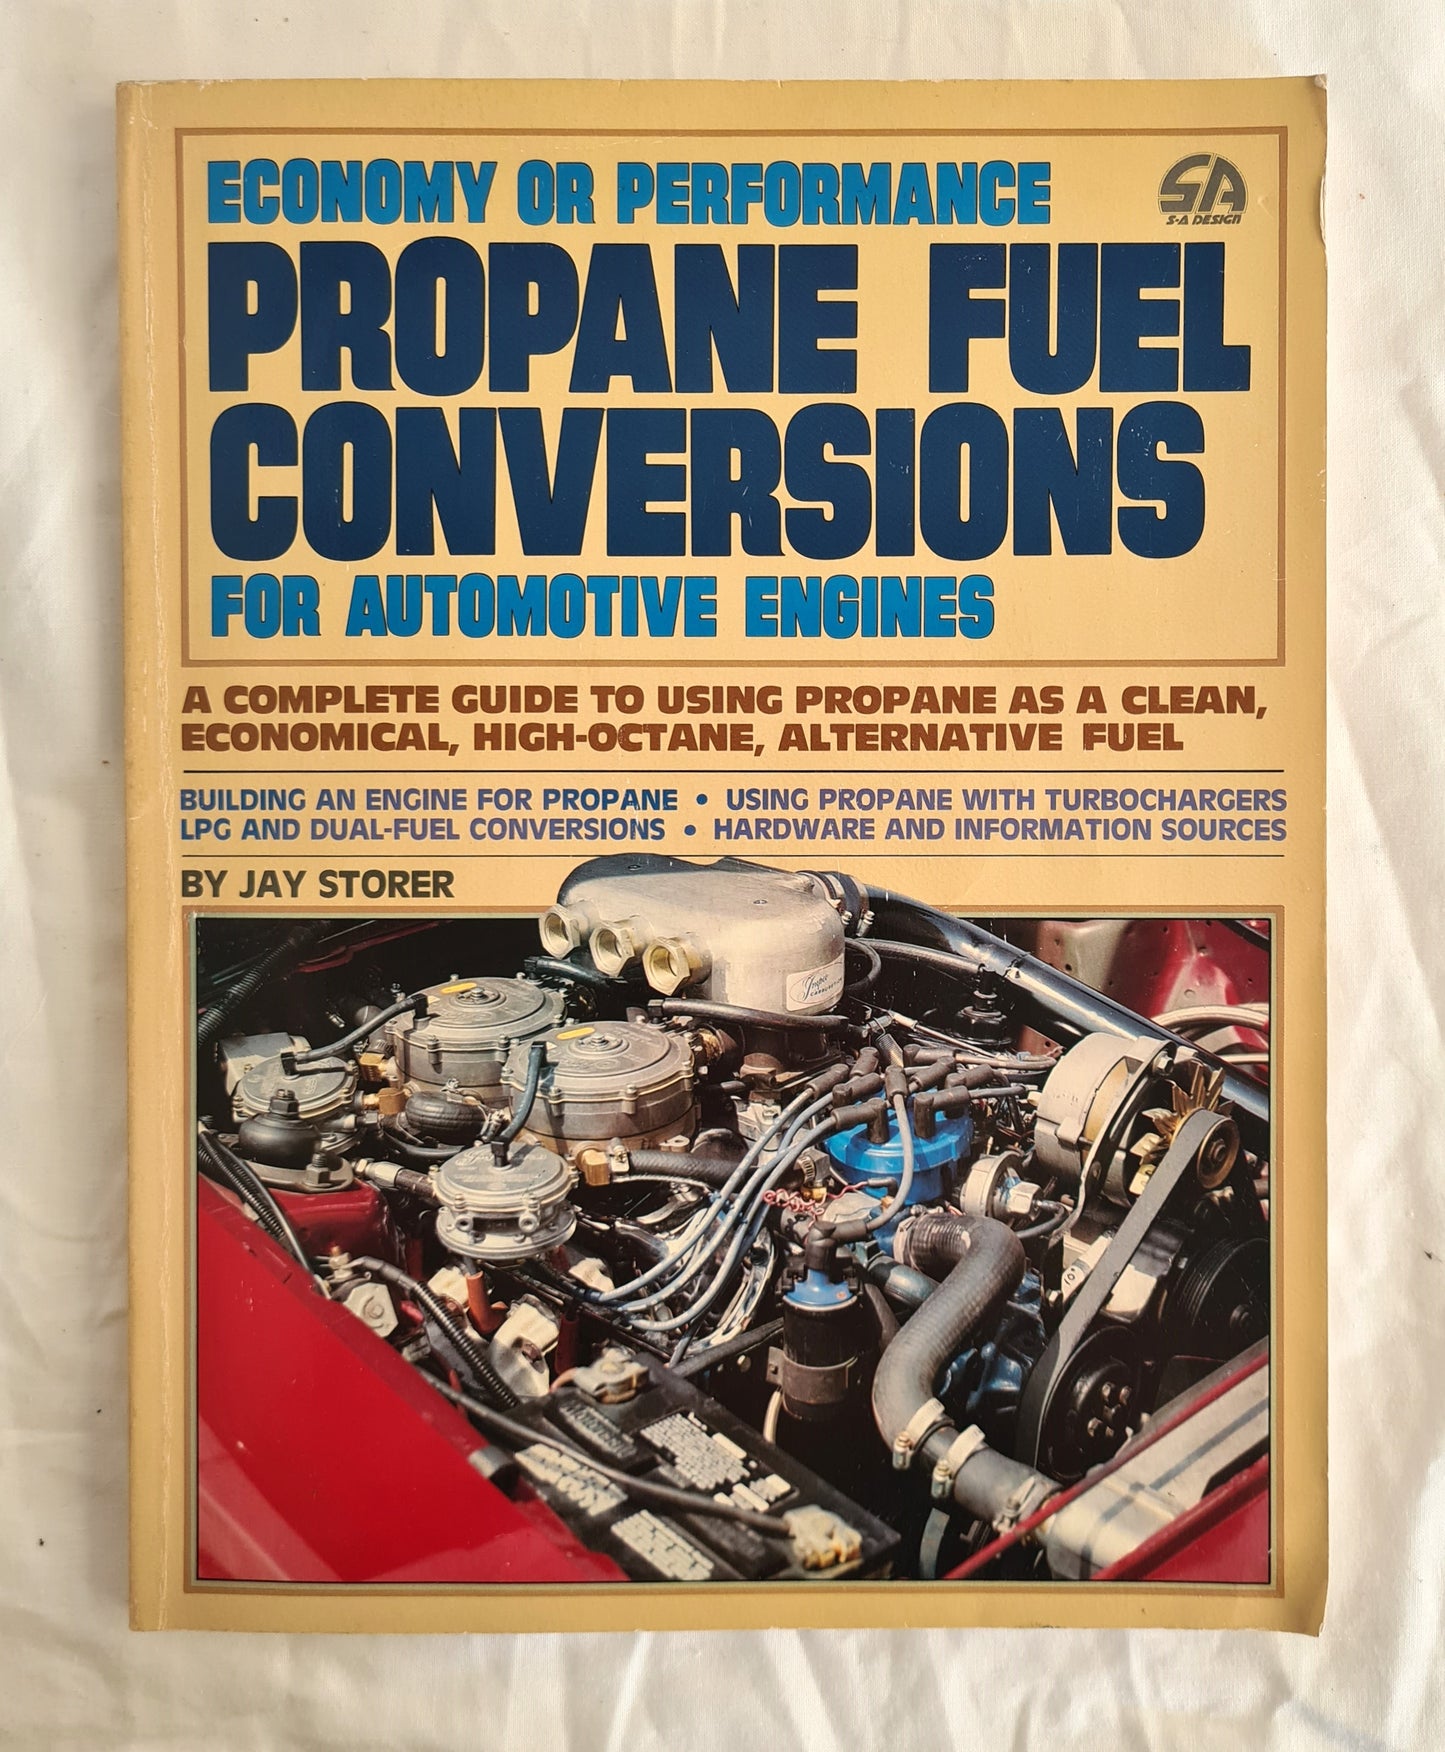 Propane Fuel Conversions  A complete guide to using propane as a clean, economical, high-octane, alternative fuel  by Jay Storer